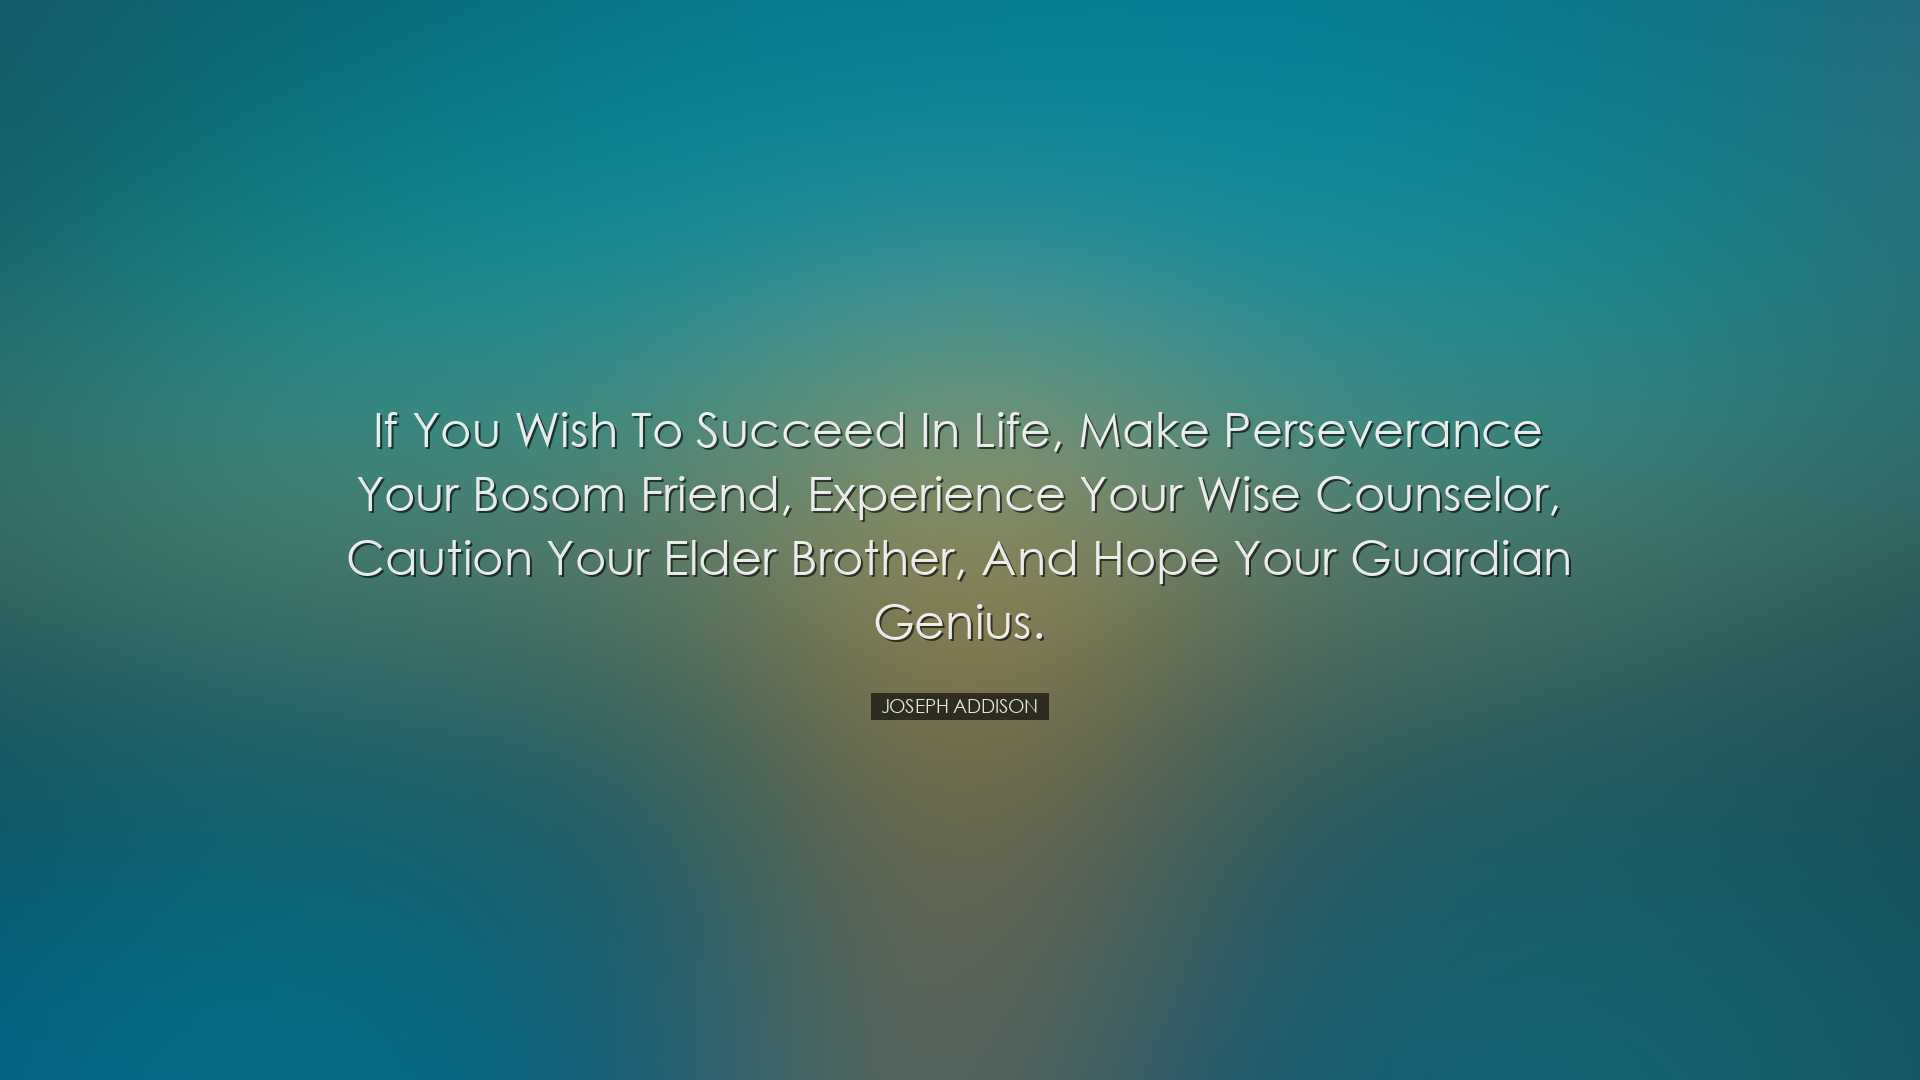 If you wish to succeed in life, make perseverance your bosom frien